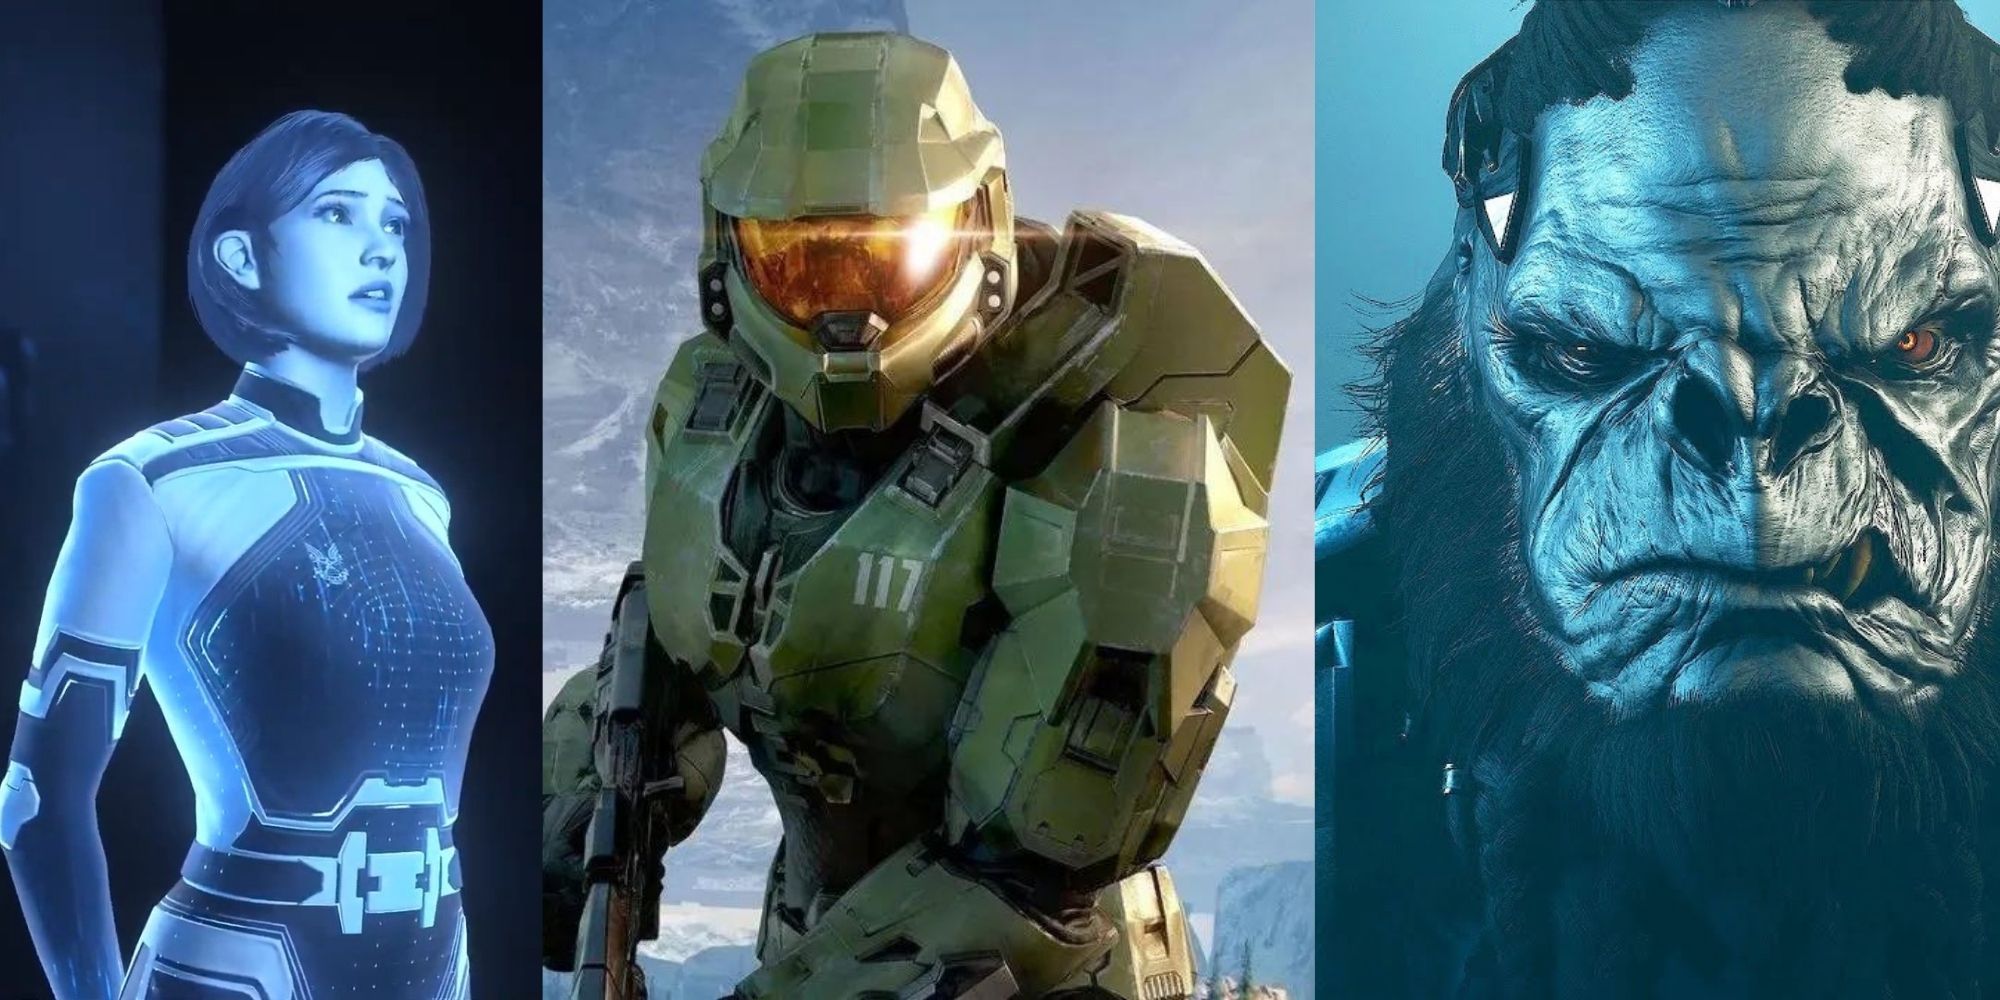 Split image of the Weapon, Master Chief, and Atriox from Halo Infinite.